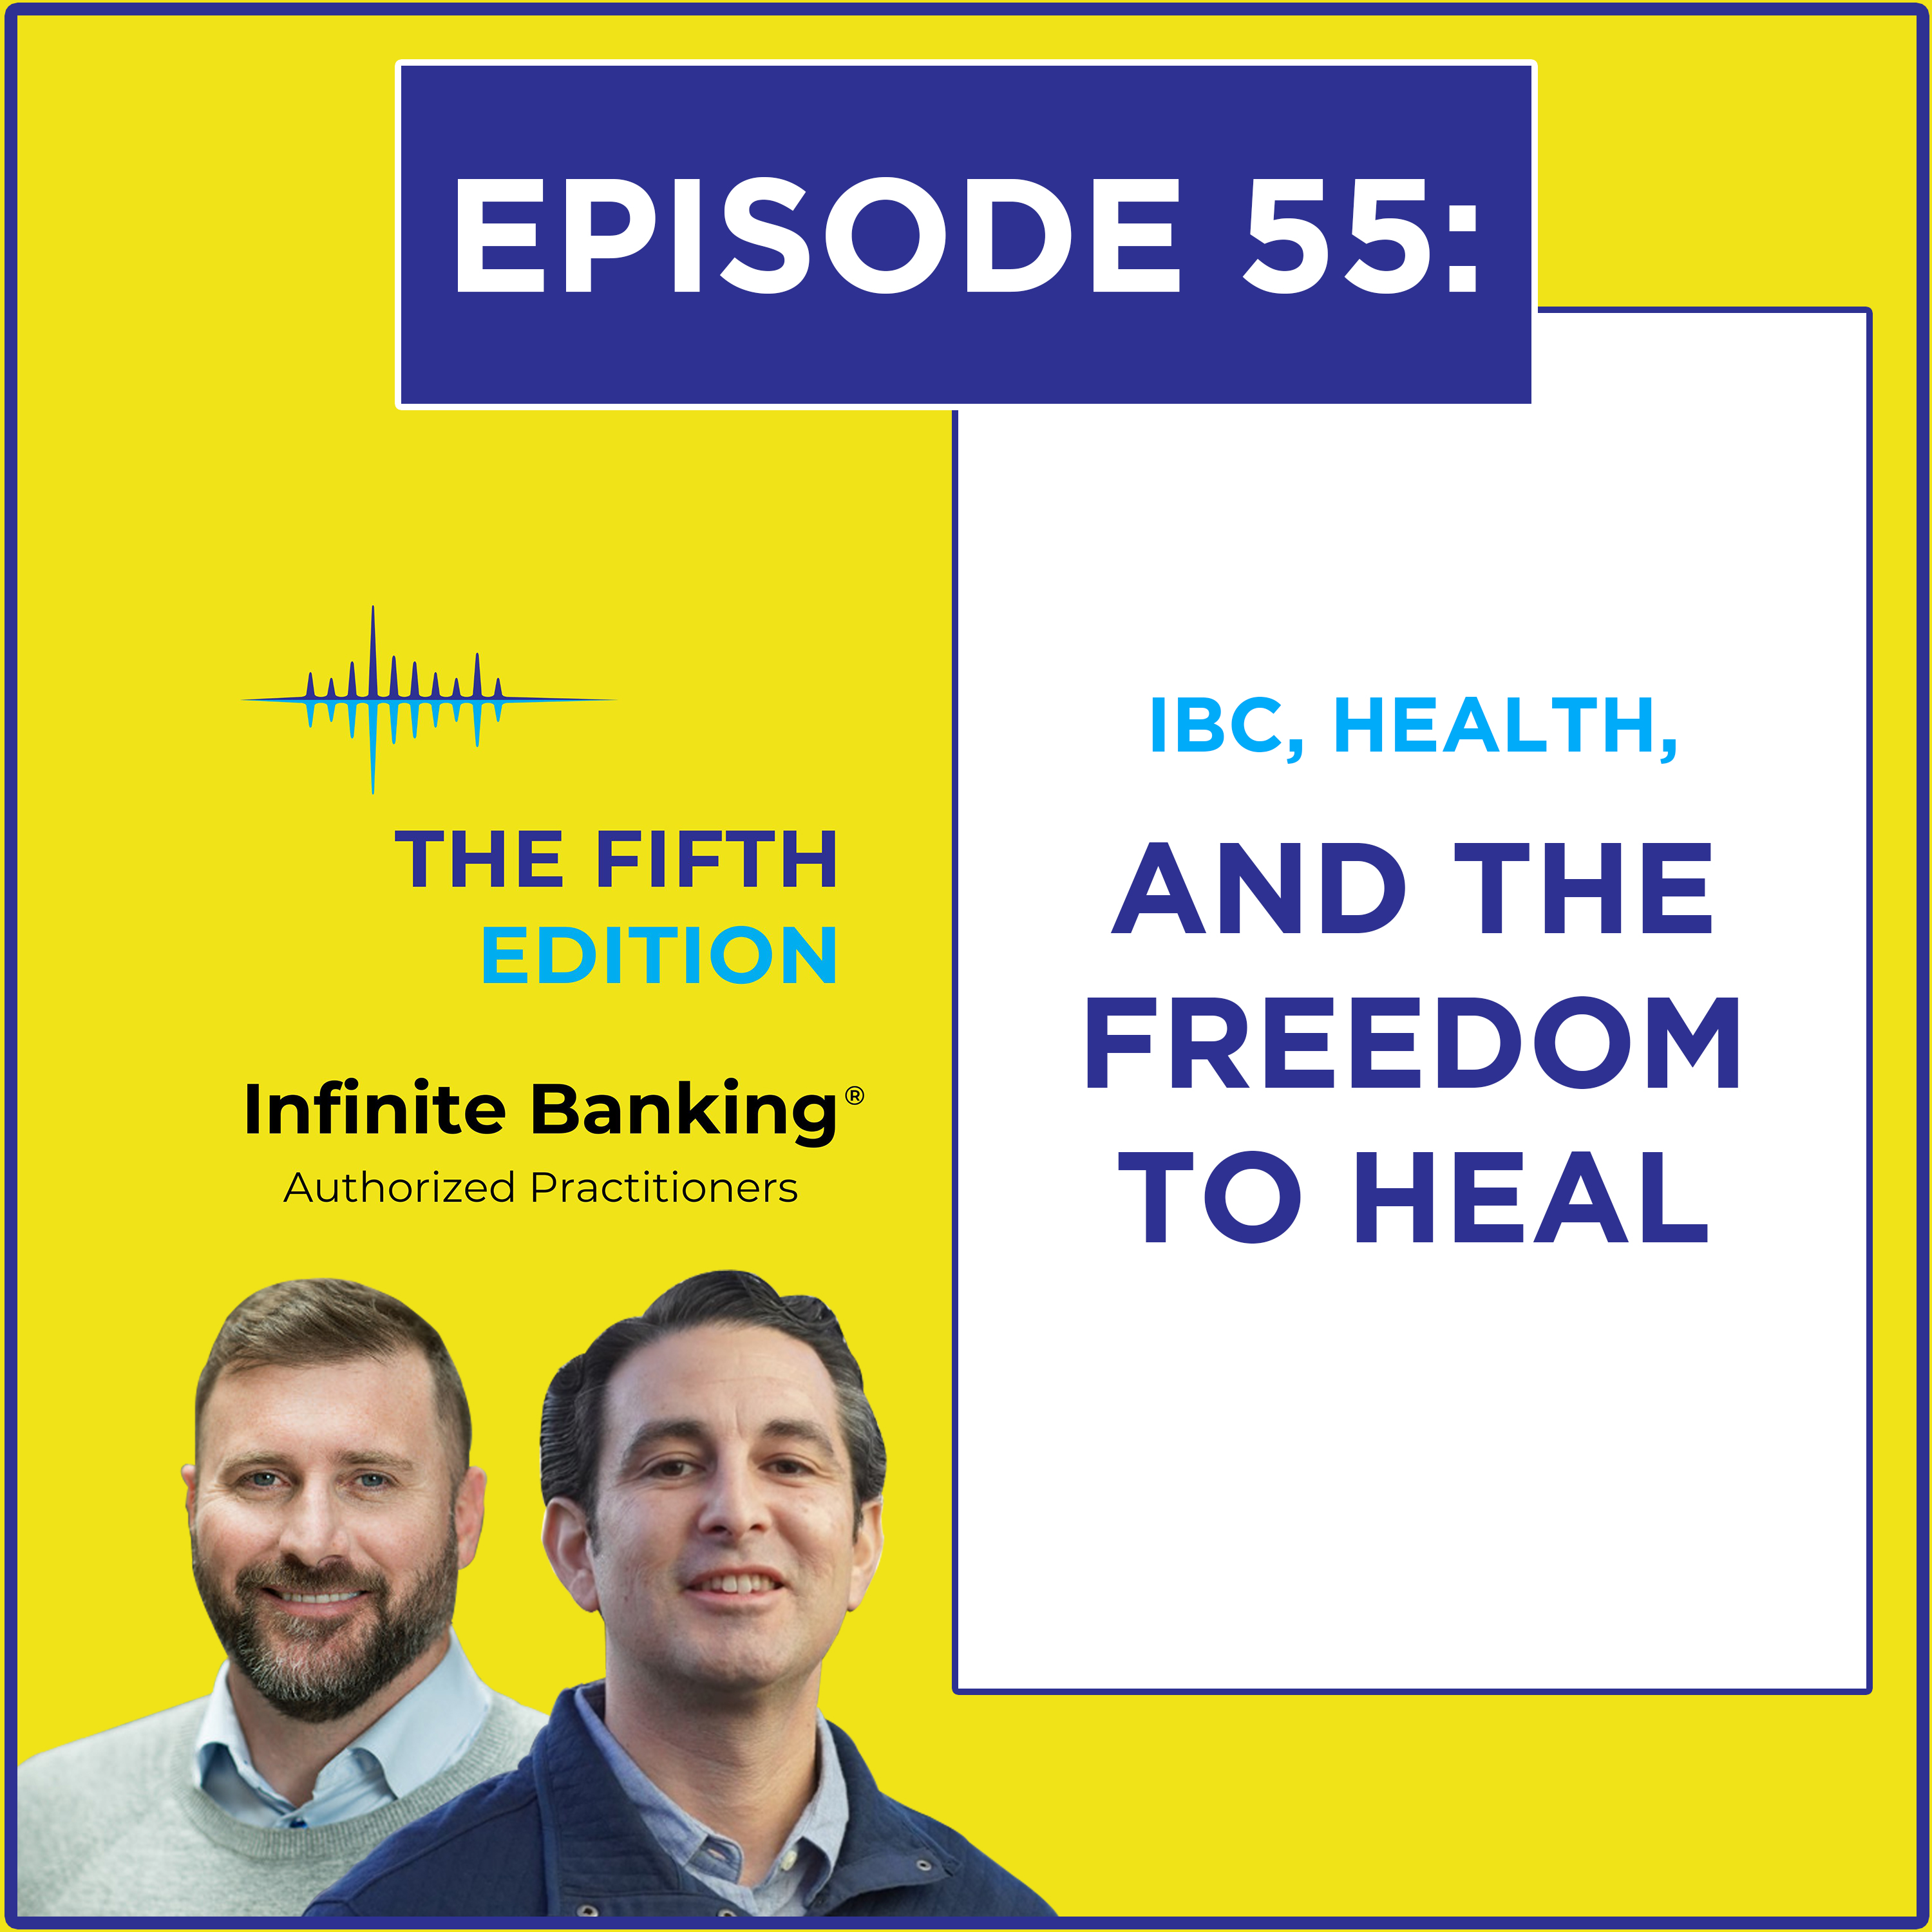 IBC, HSAs, Health, and the Freedom to Heal Image